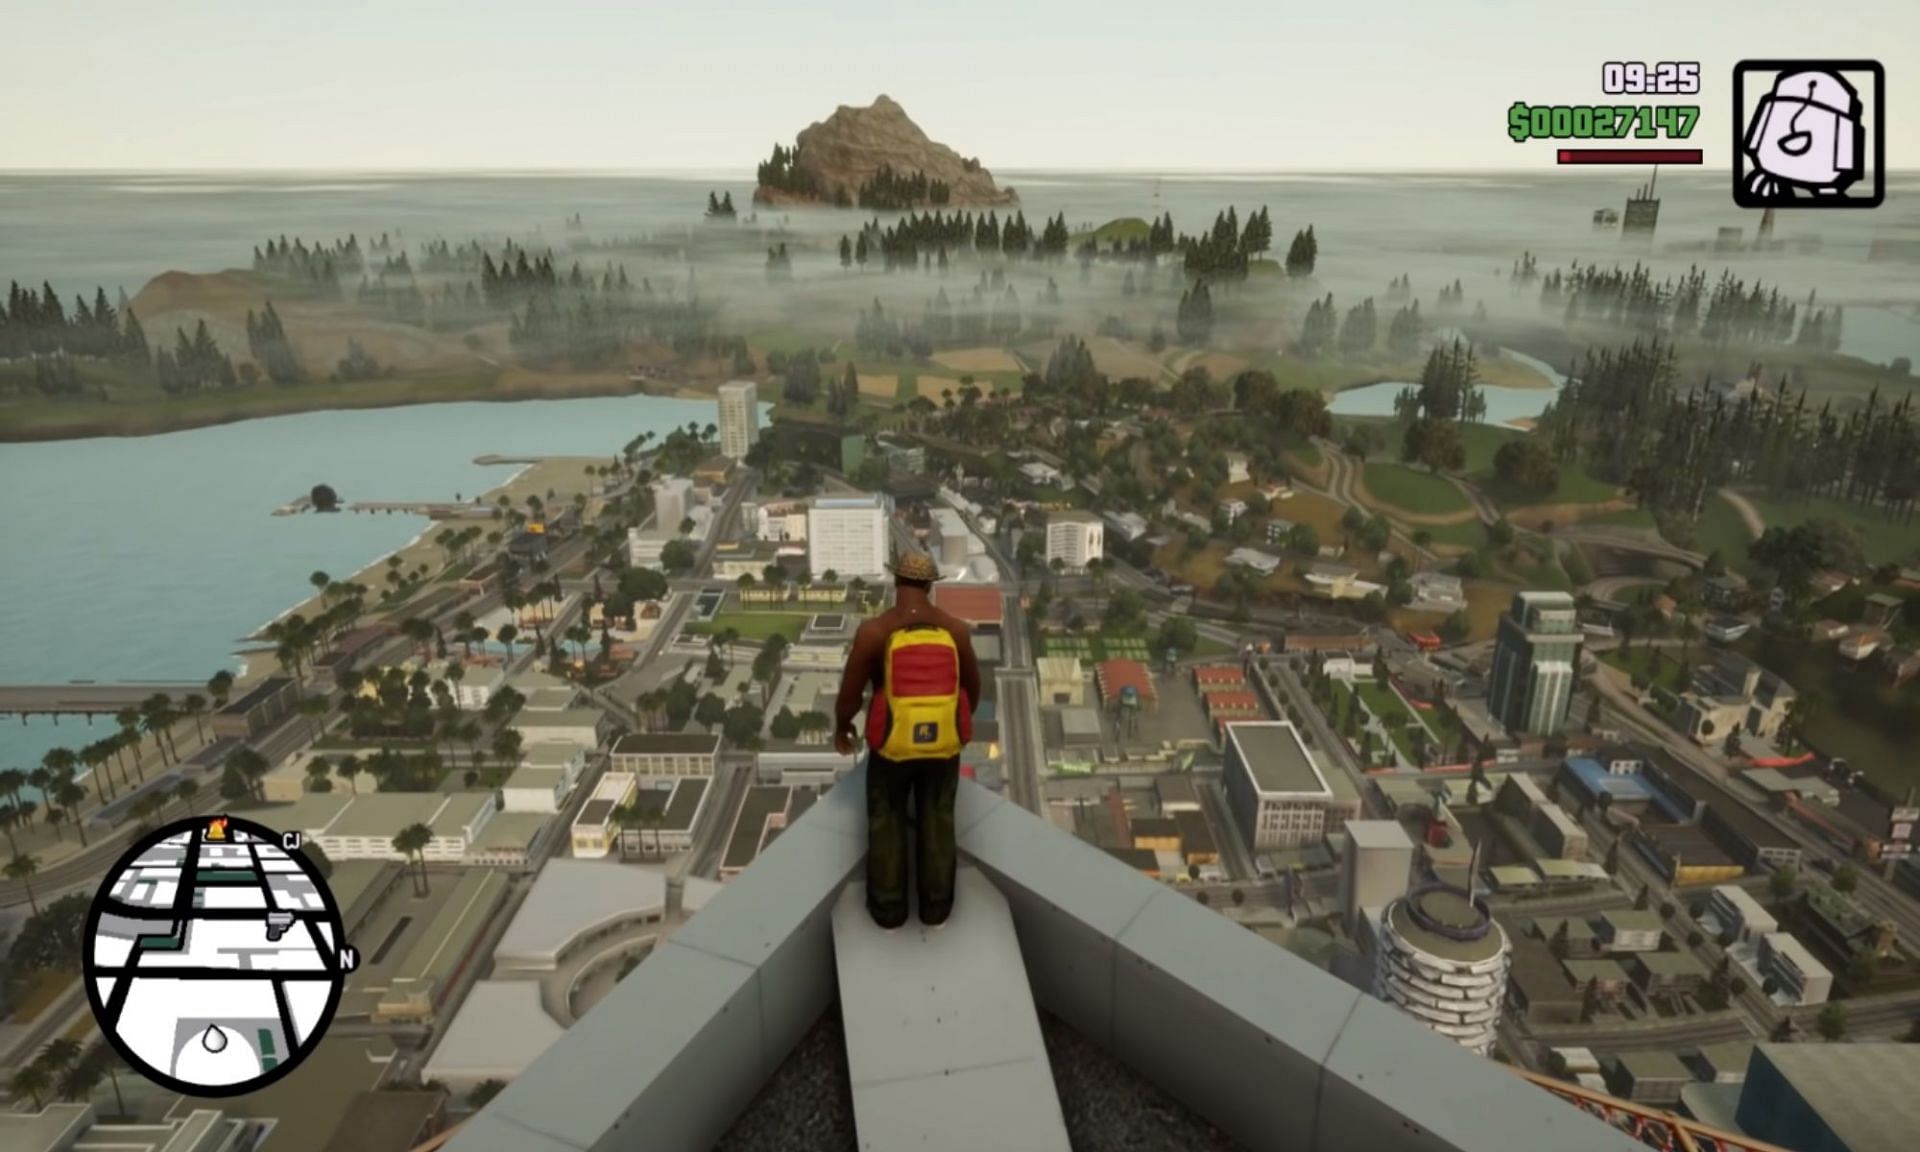 CJ looking over the foggy distance (Image via Rockstar Games)